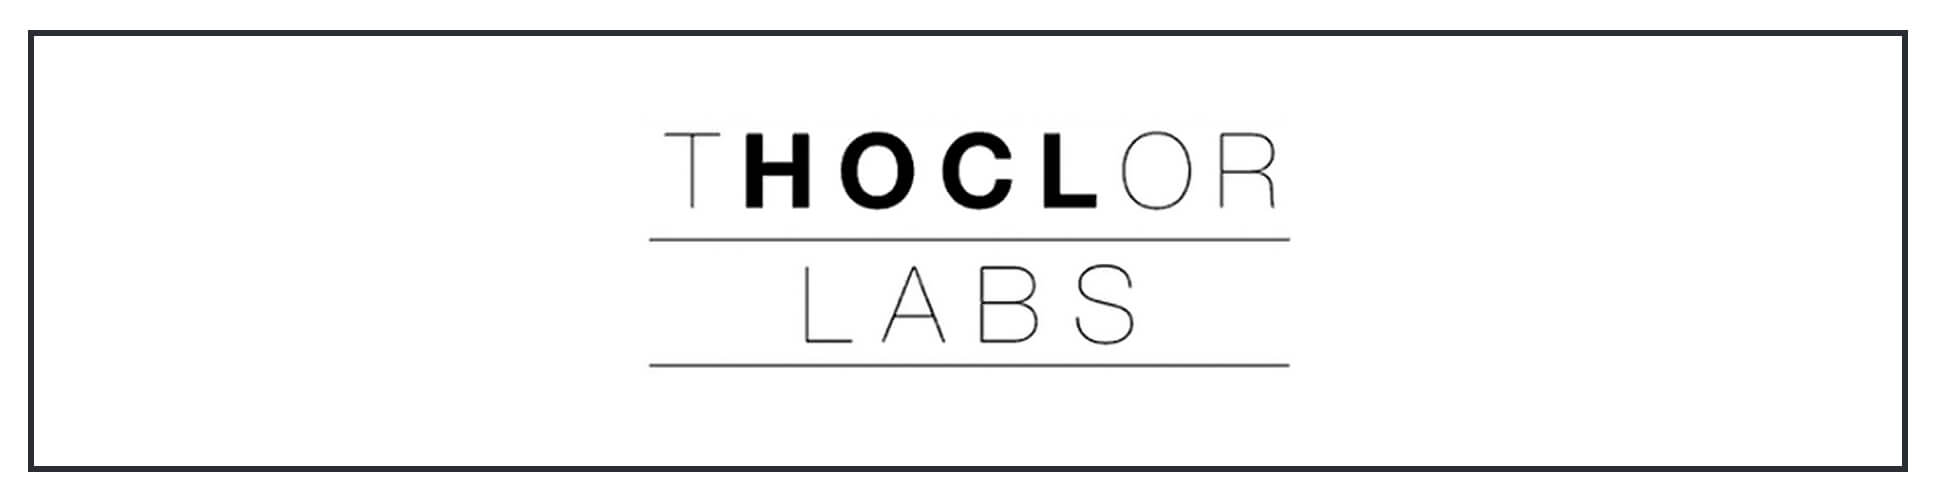 The logo for thocol labs.